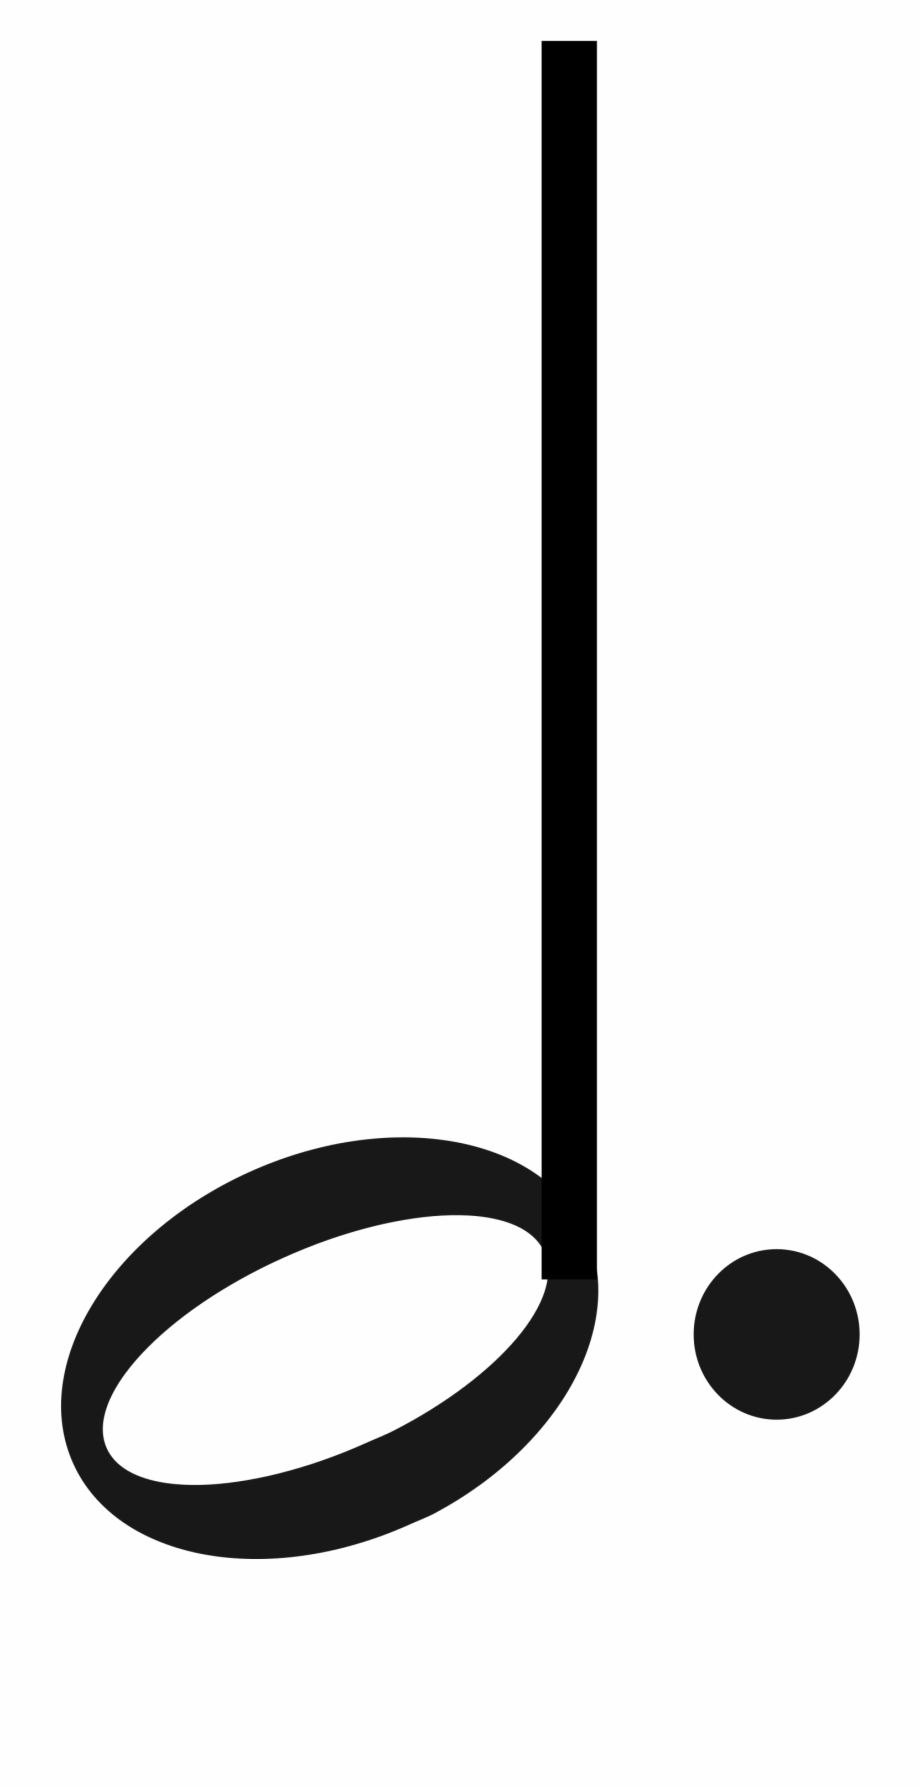 dotted half note symbol
